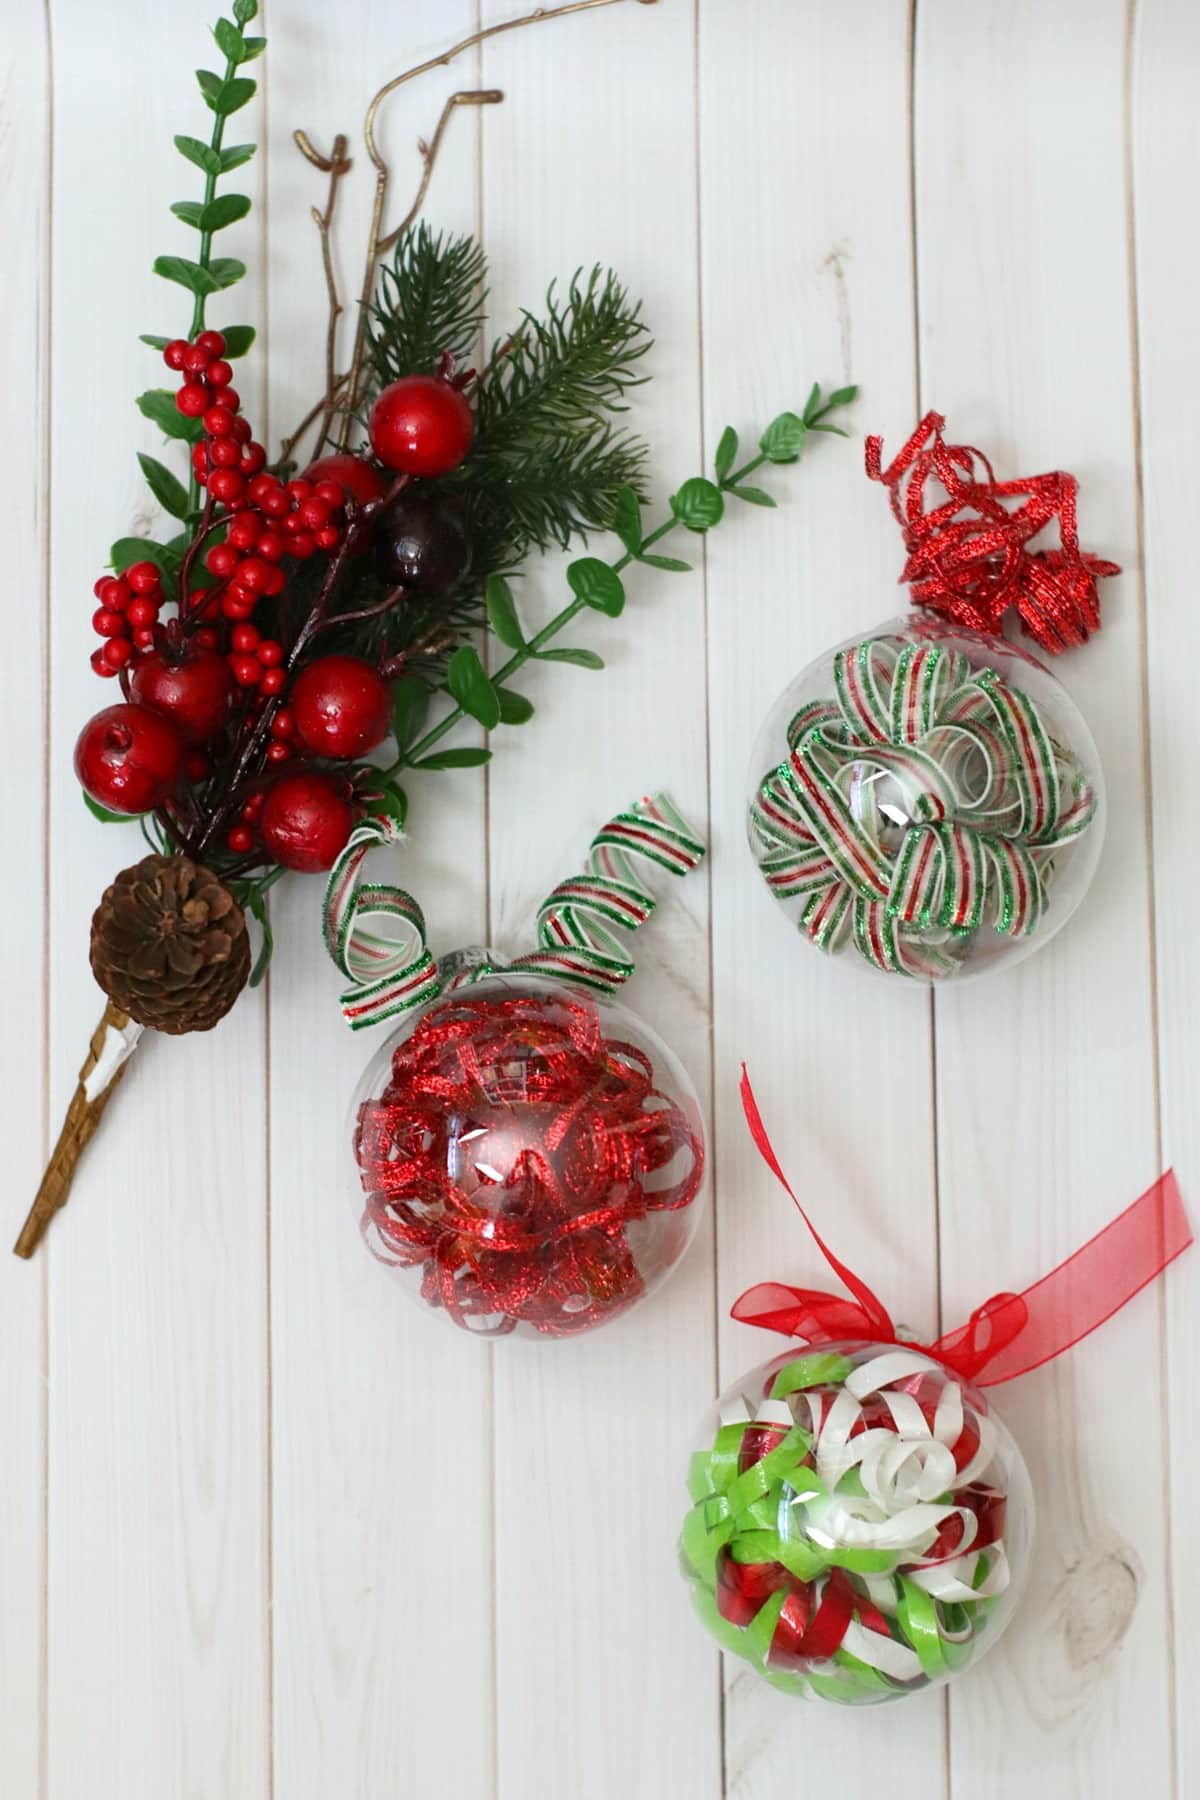 Christmas ornaments with ribbons and pine cones.